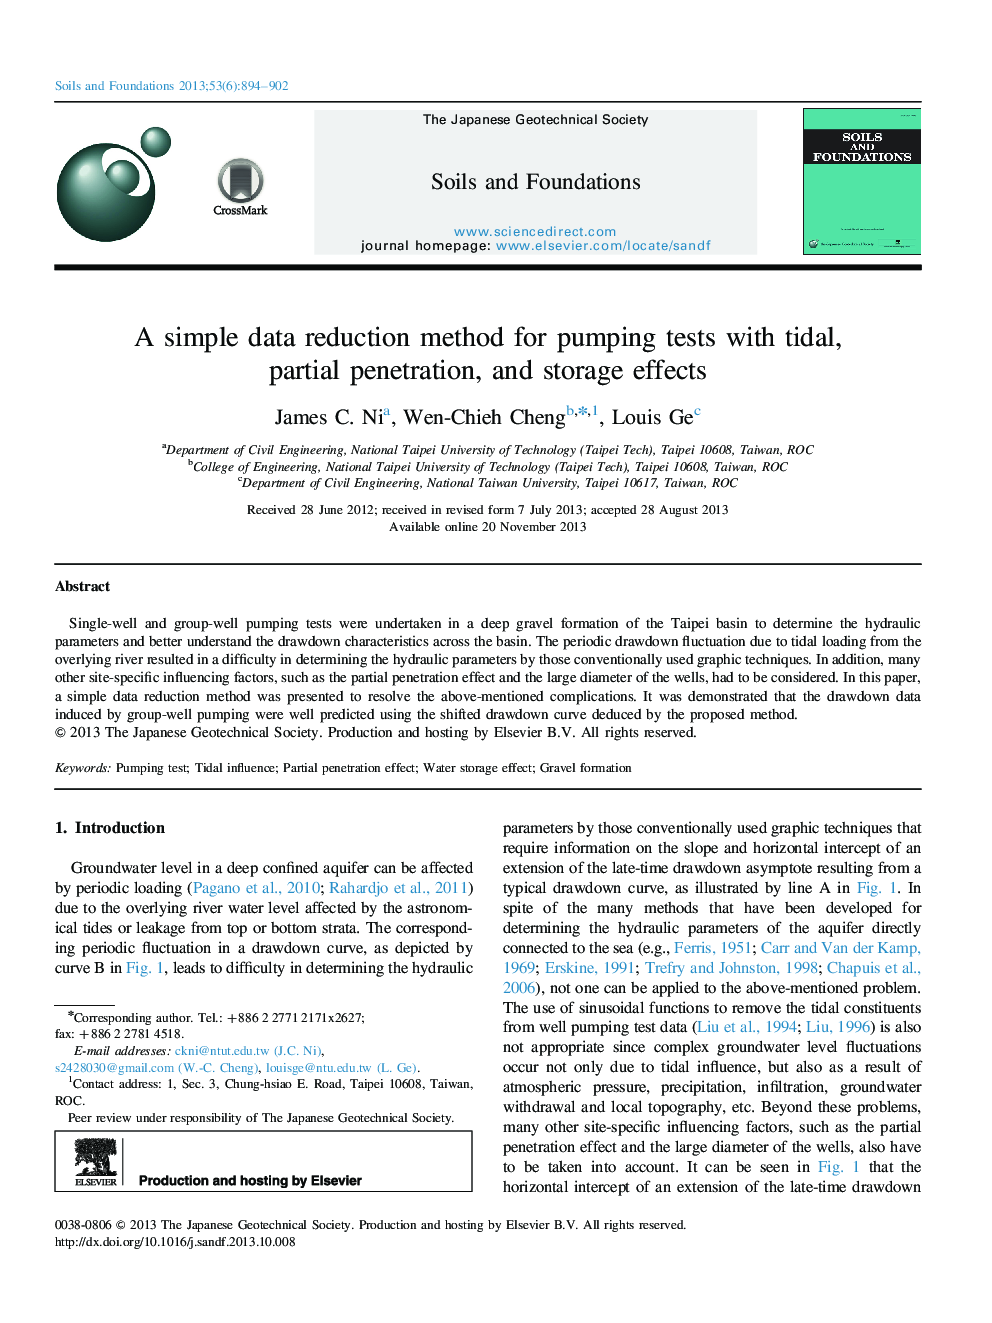 A simple data reduction method for pumping tests with tidal, partial penetration, and storage effects 